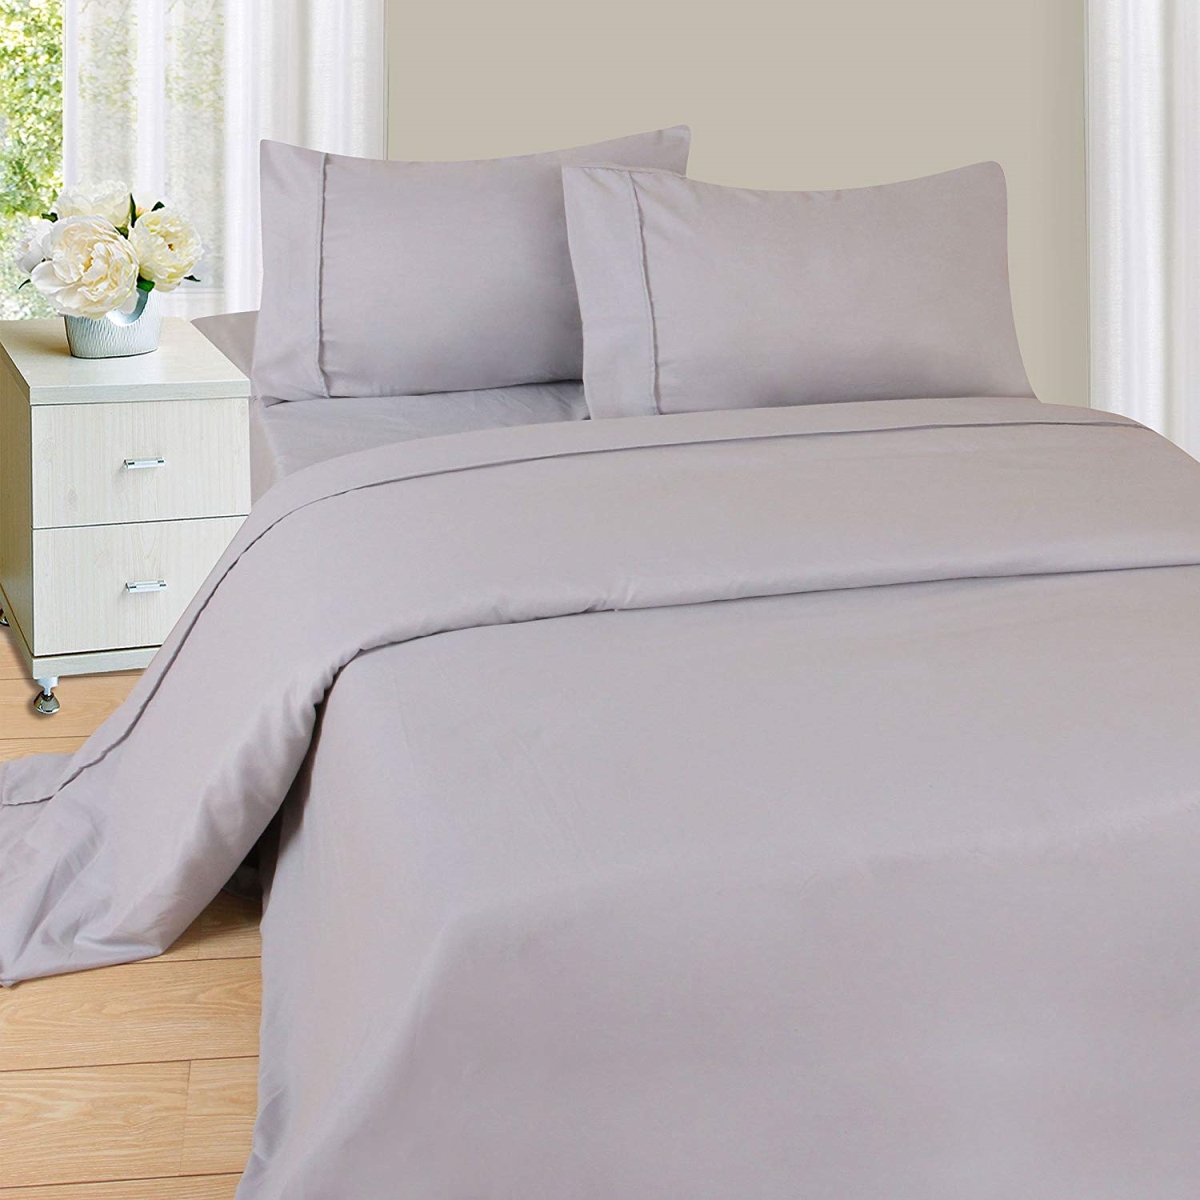 66a-05656 1200 Series Sheet Set, Twin Size & Extra Large - Silver